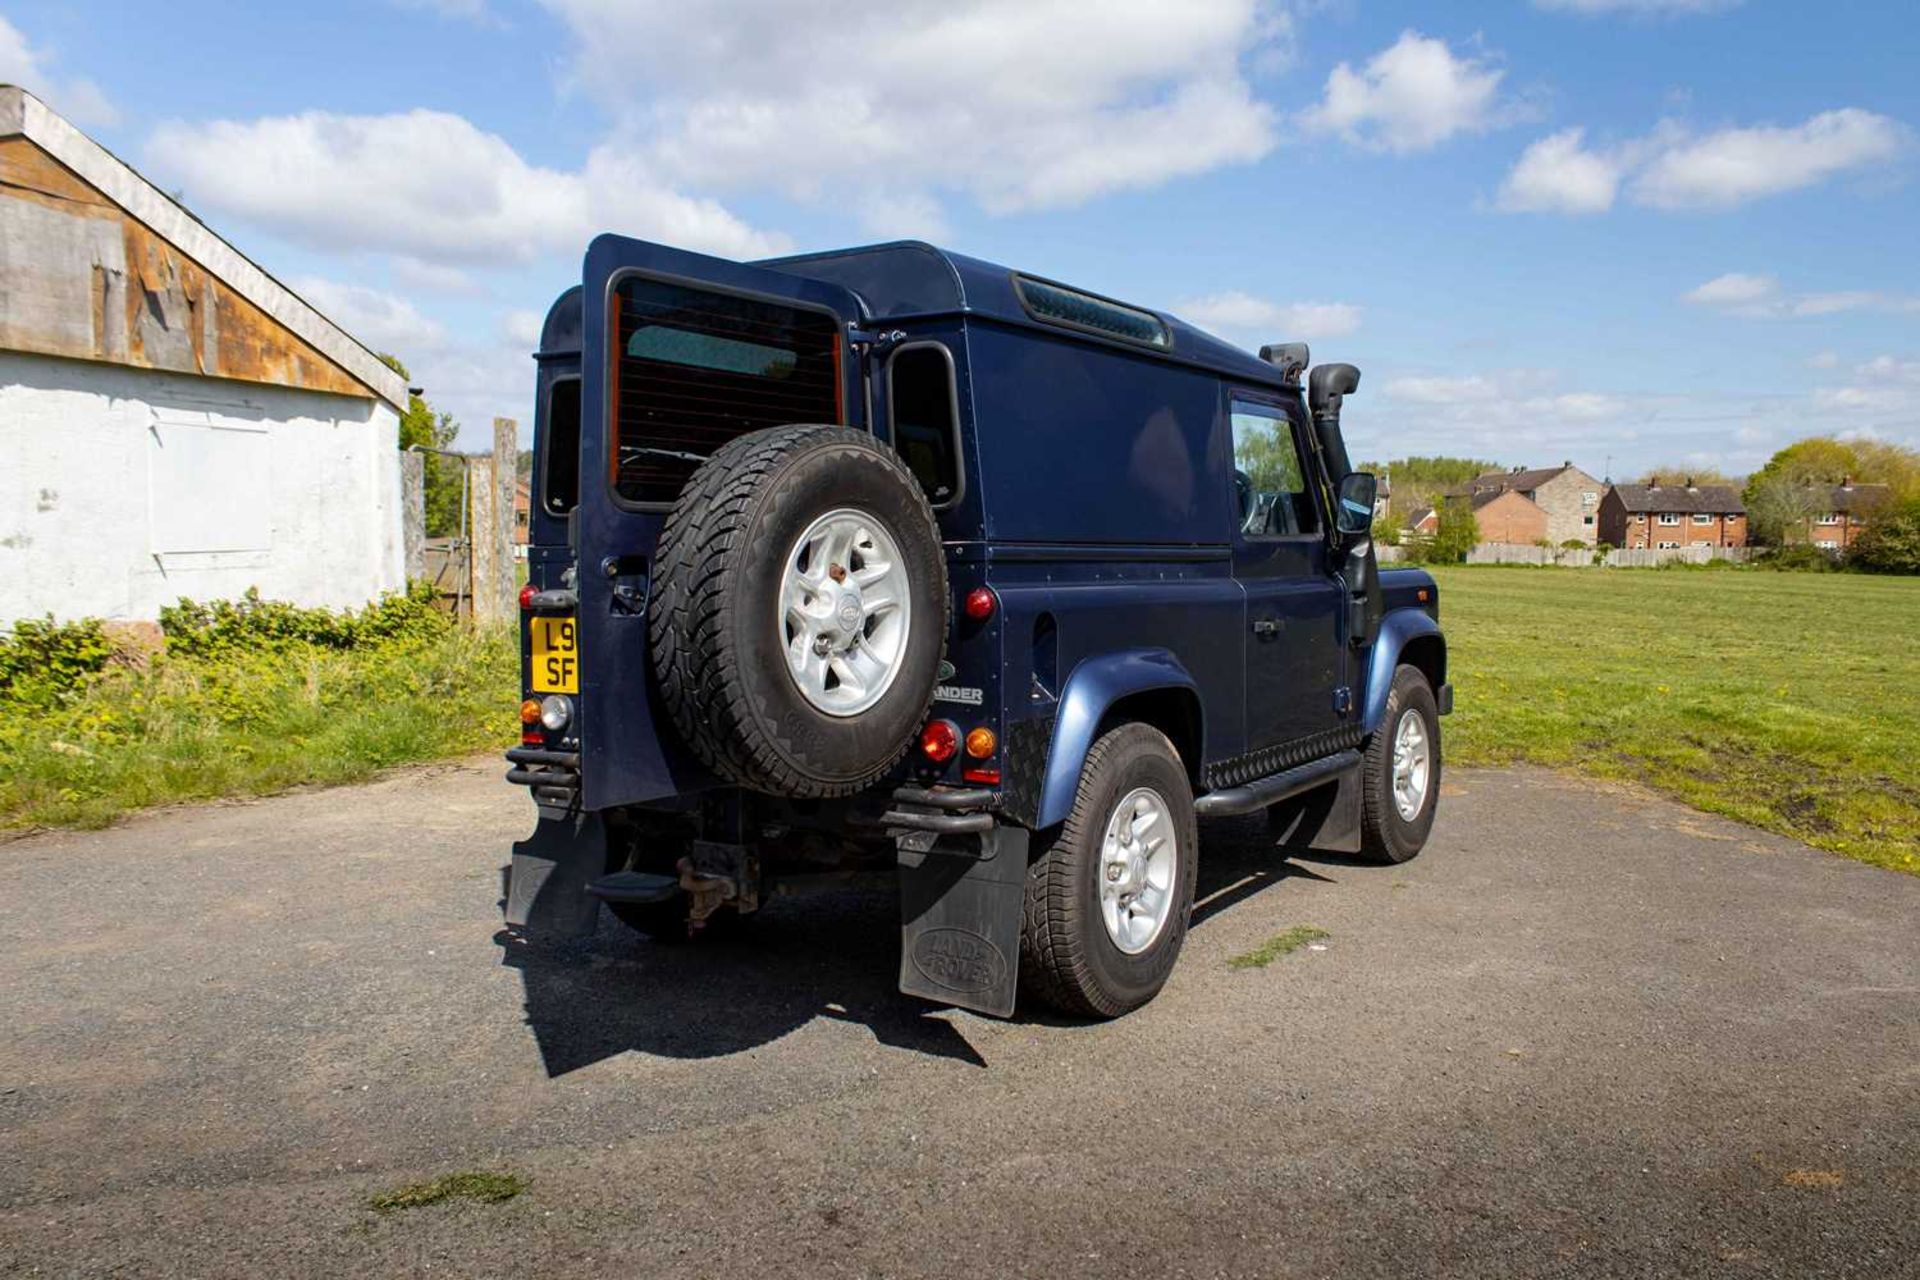 2007 Land Rover Defender 90 County  Powered by the 2.4-litre TDCi unit and features numerous tastefu - Image 73 of 76